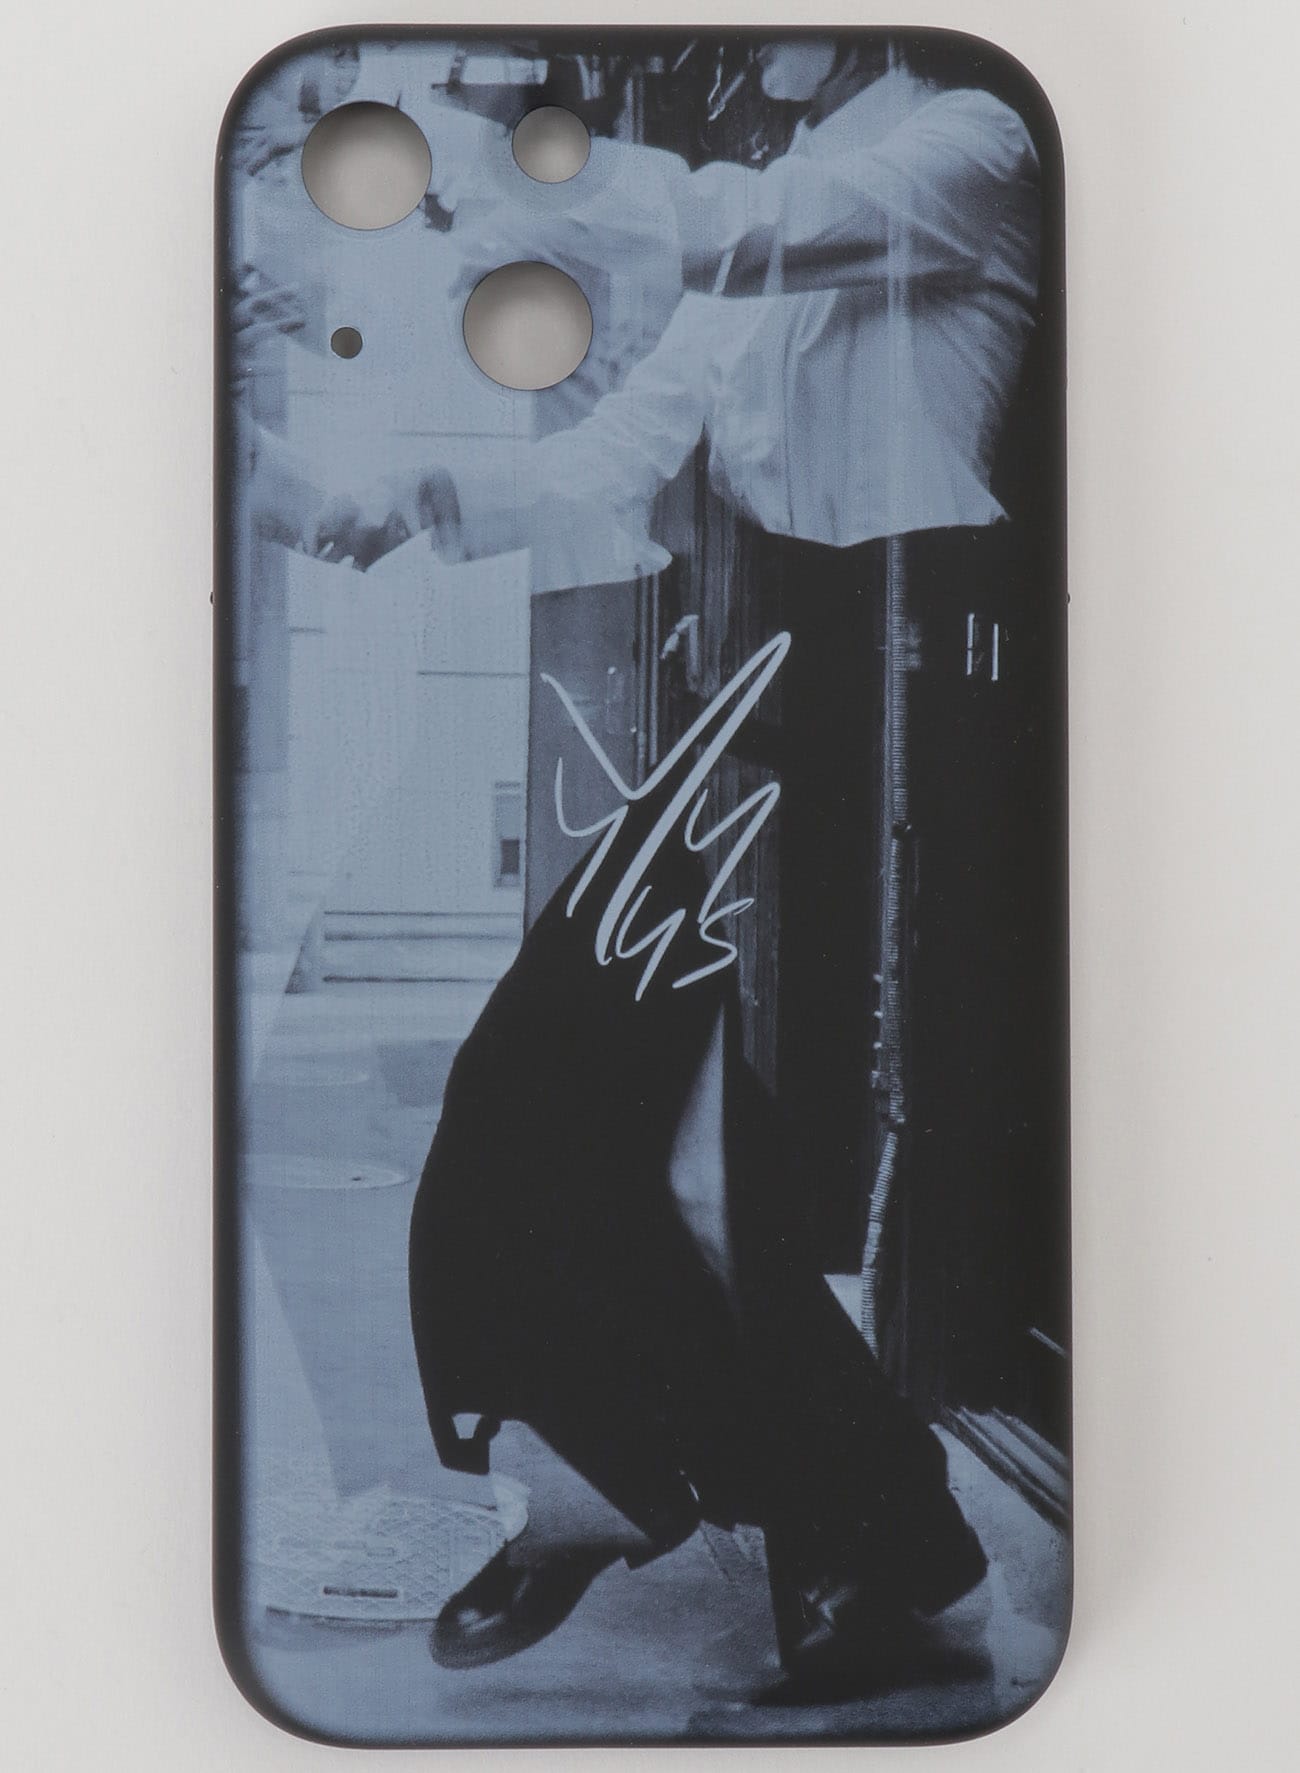 [Y's 1972 - A MOMENT IN Y's WITH MAX VADUKUL]iPHONE CASE